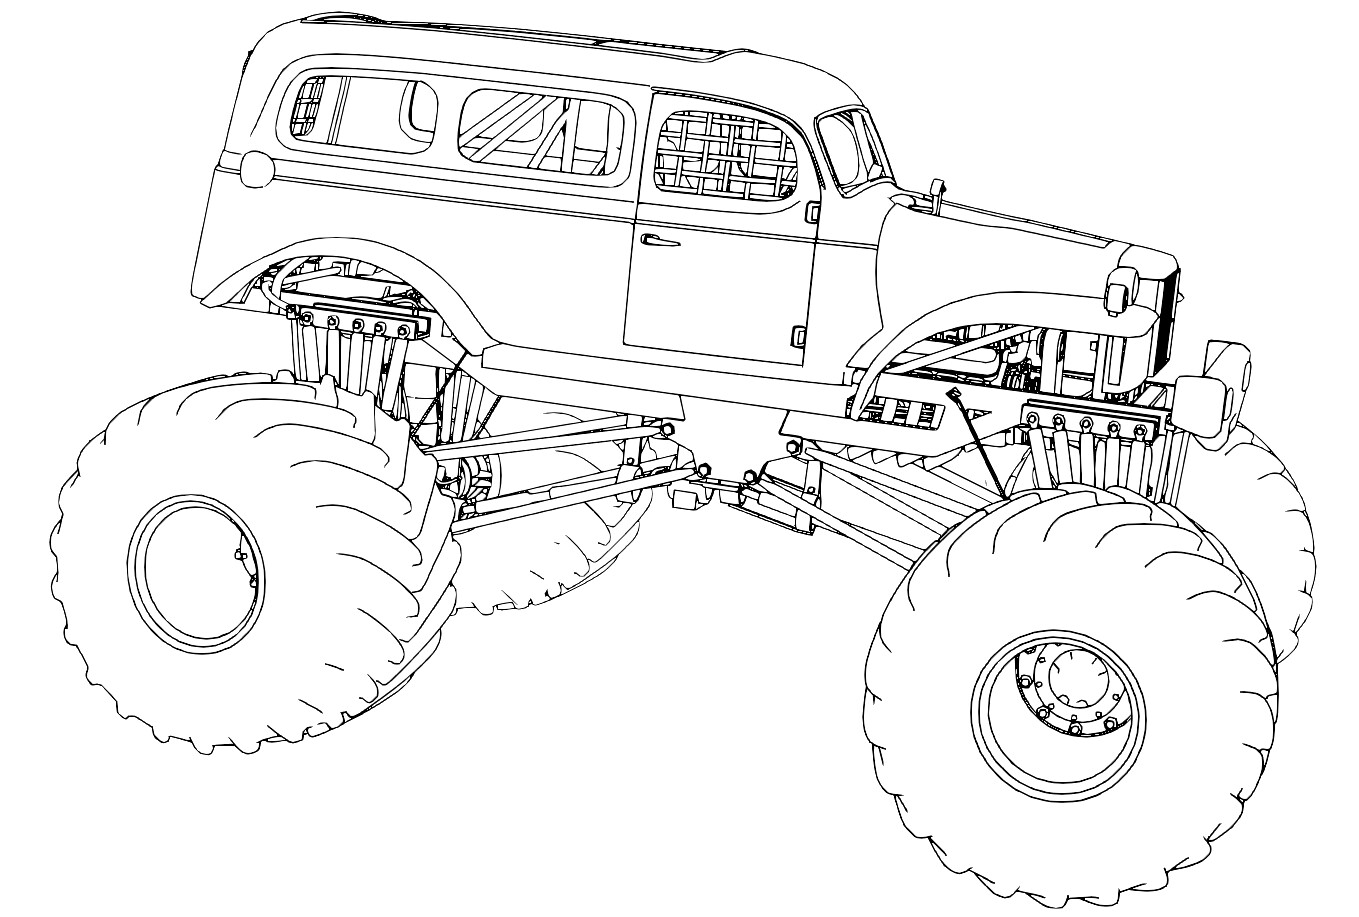 Monster Truck coloring page Hot Wheels 